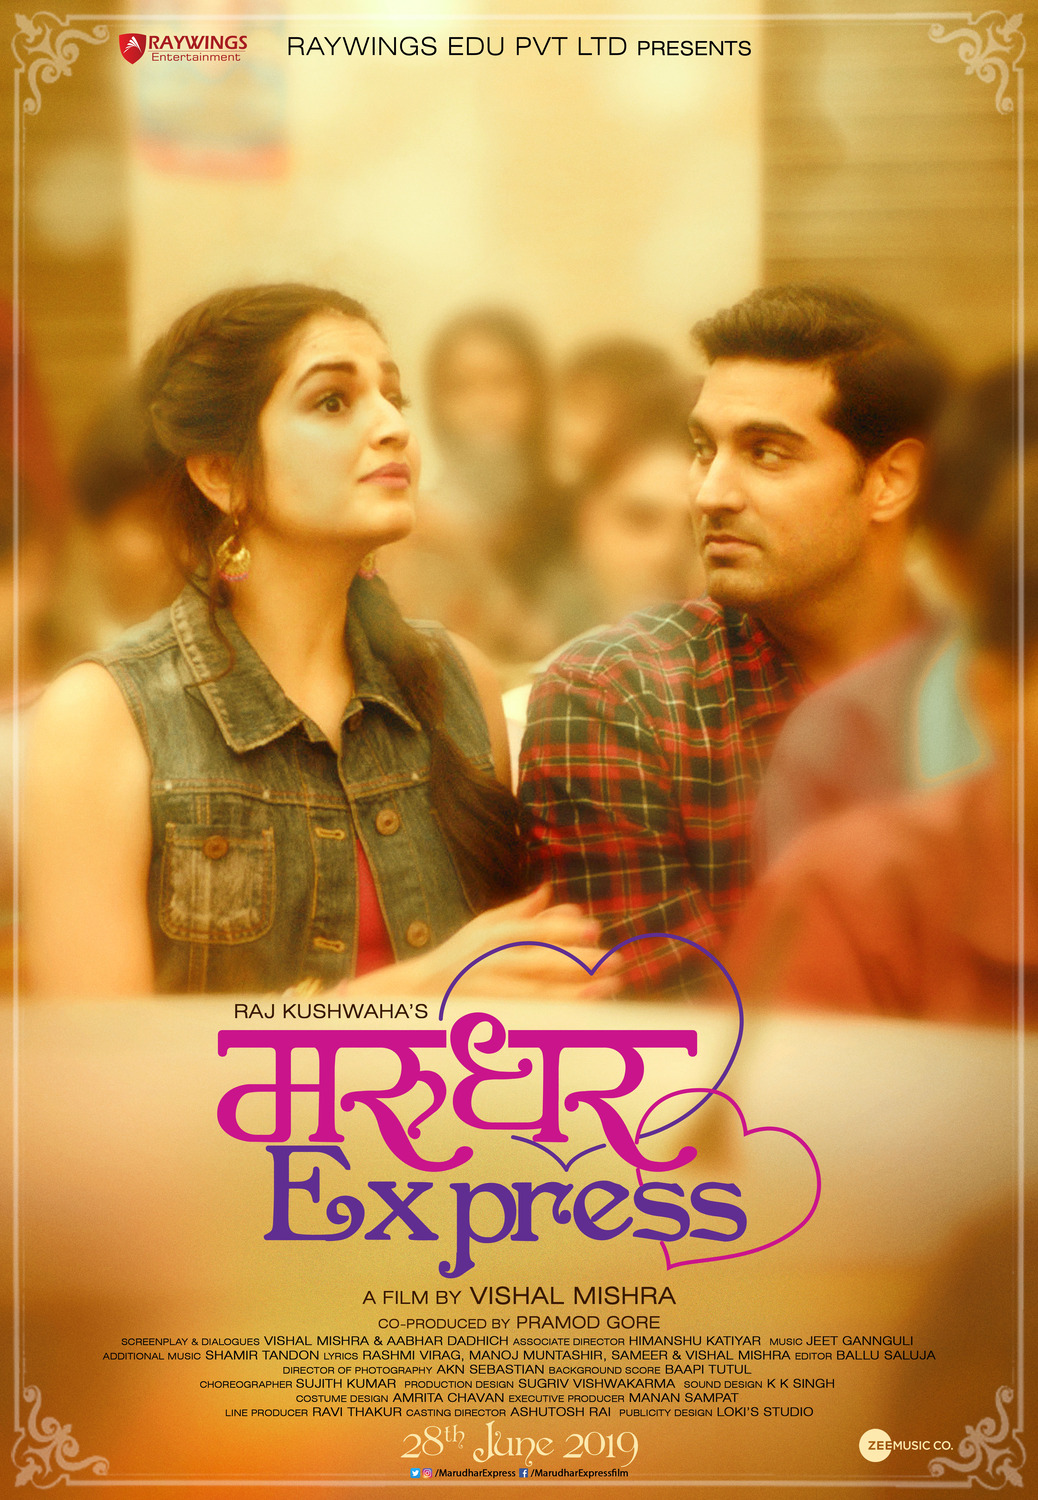 Extra Large Movie Poster Image for Marudhar Express (#2 of 2)